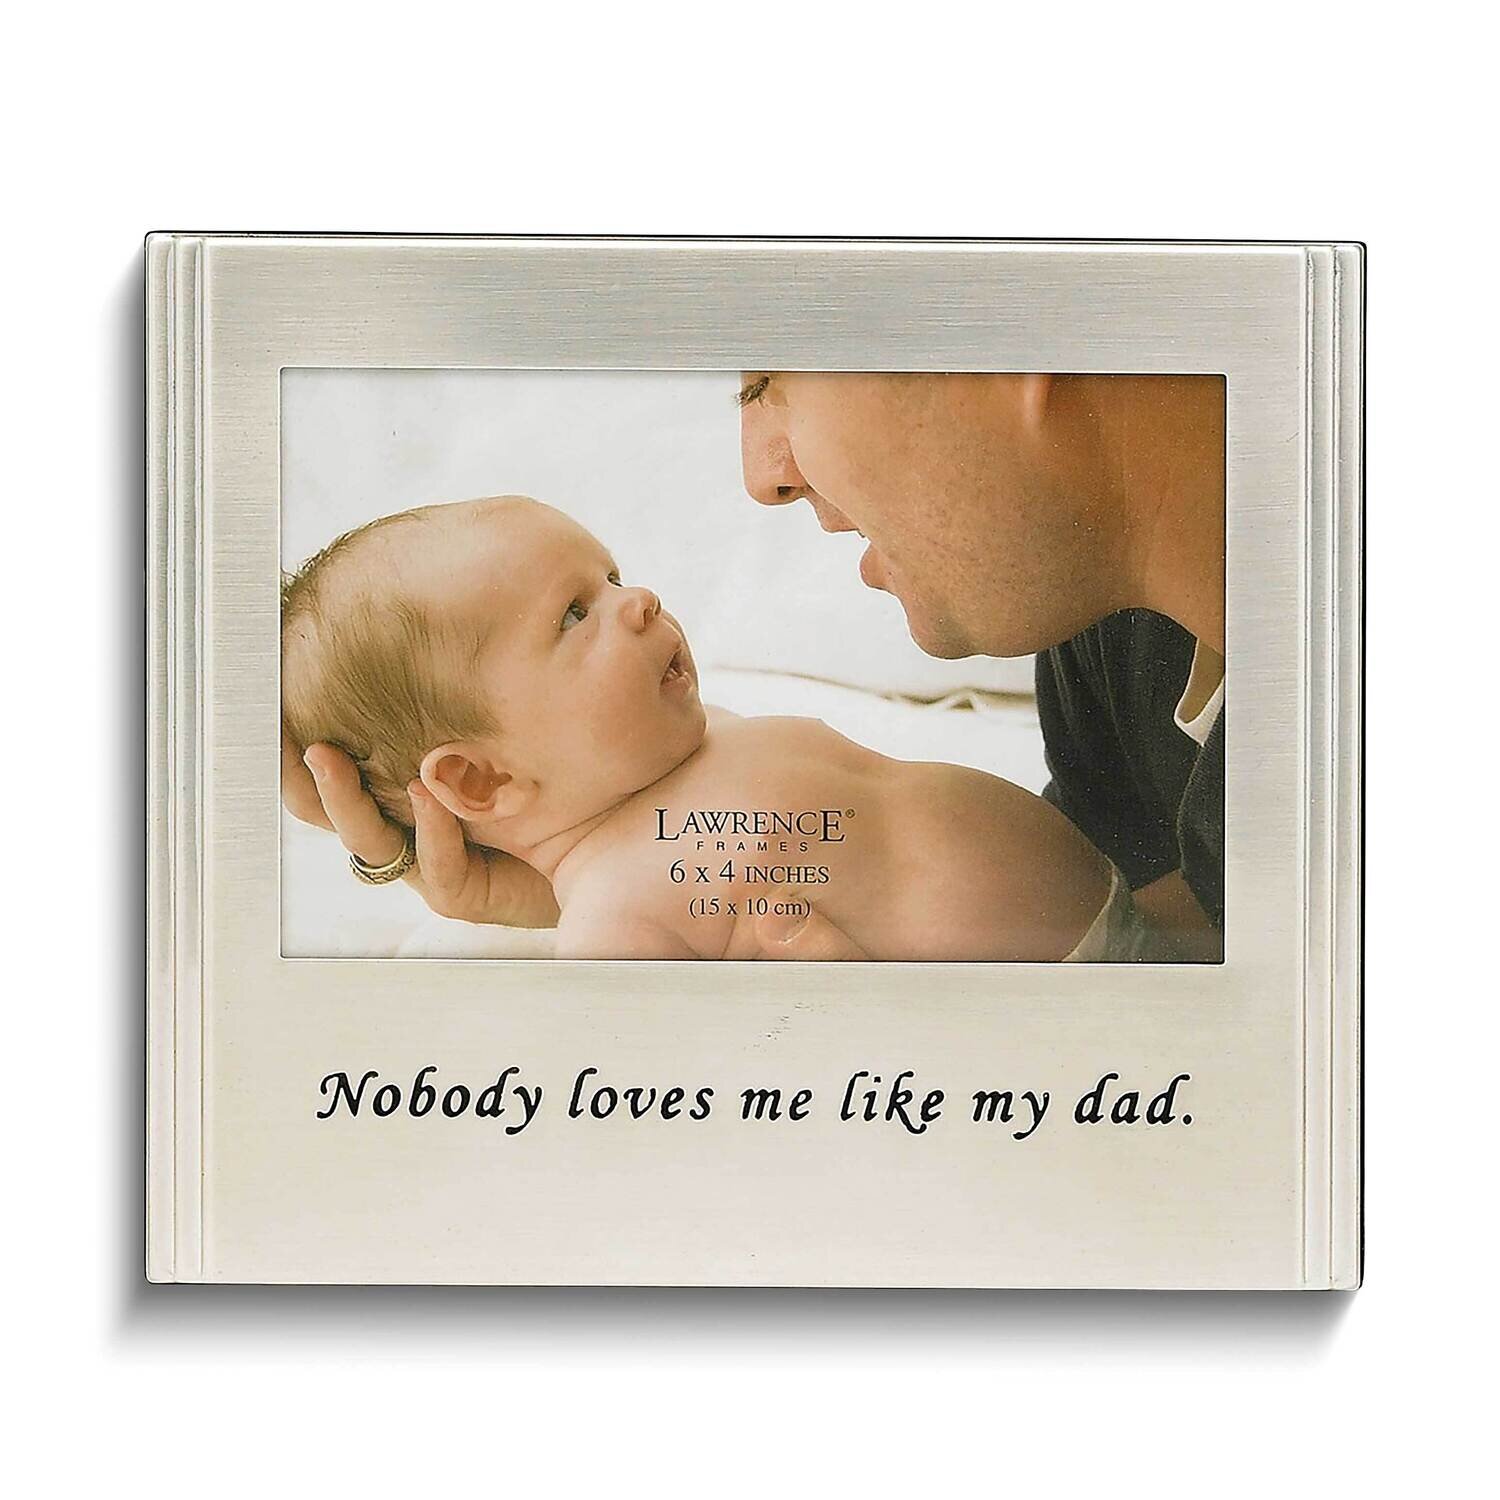 Nobody loves me like my dad 6x4 Photo Frame GM4560